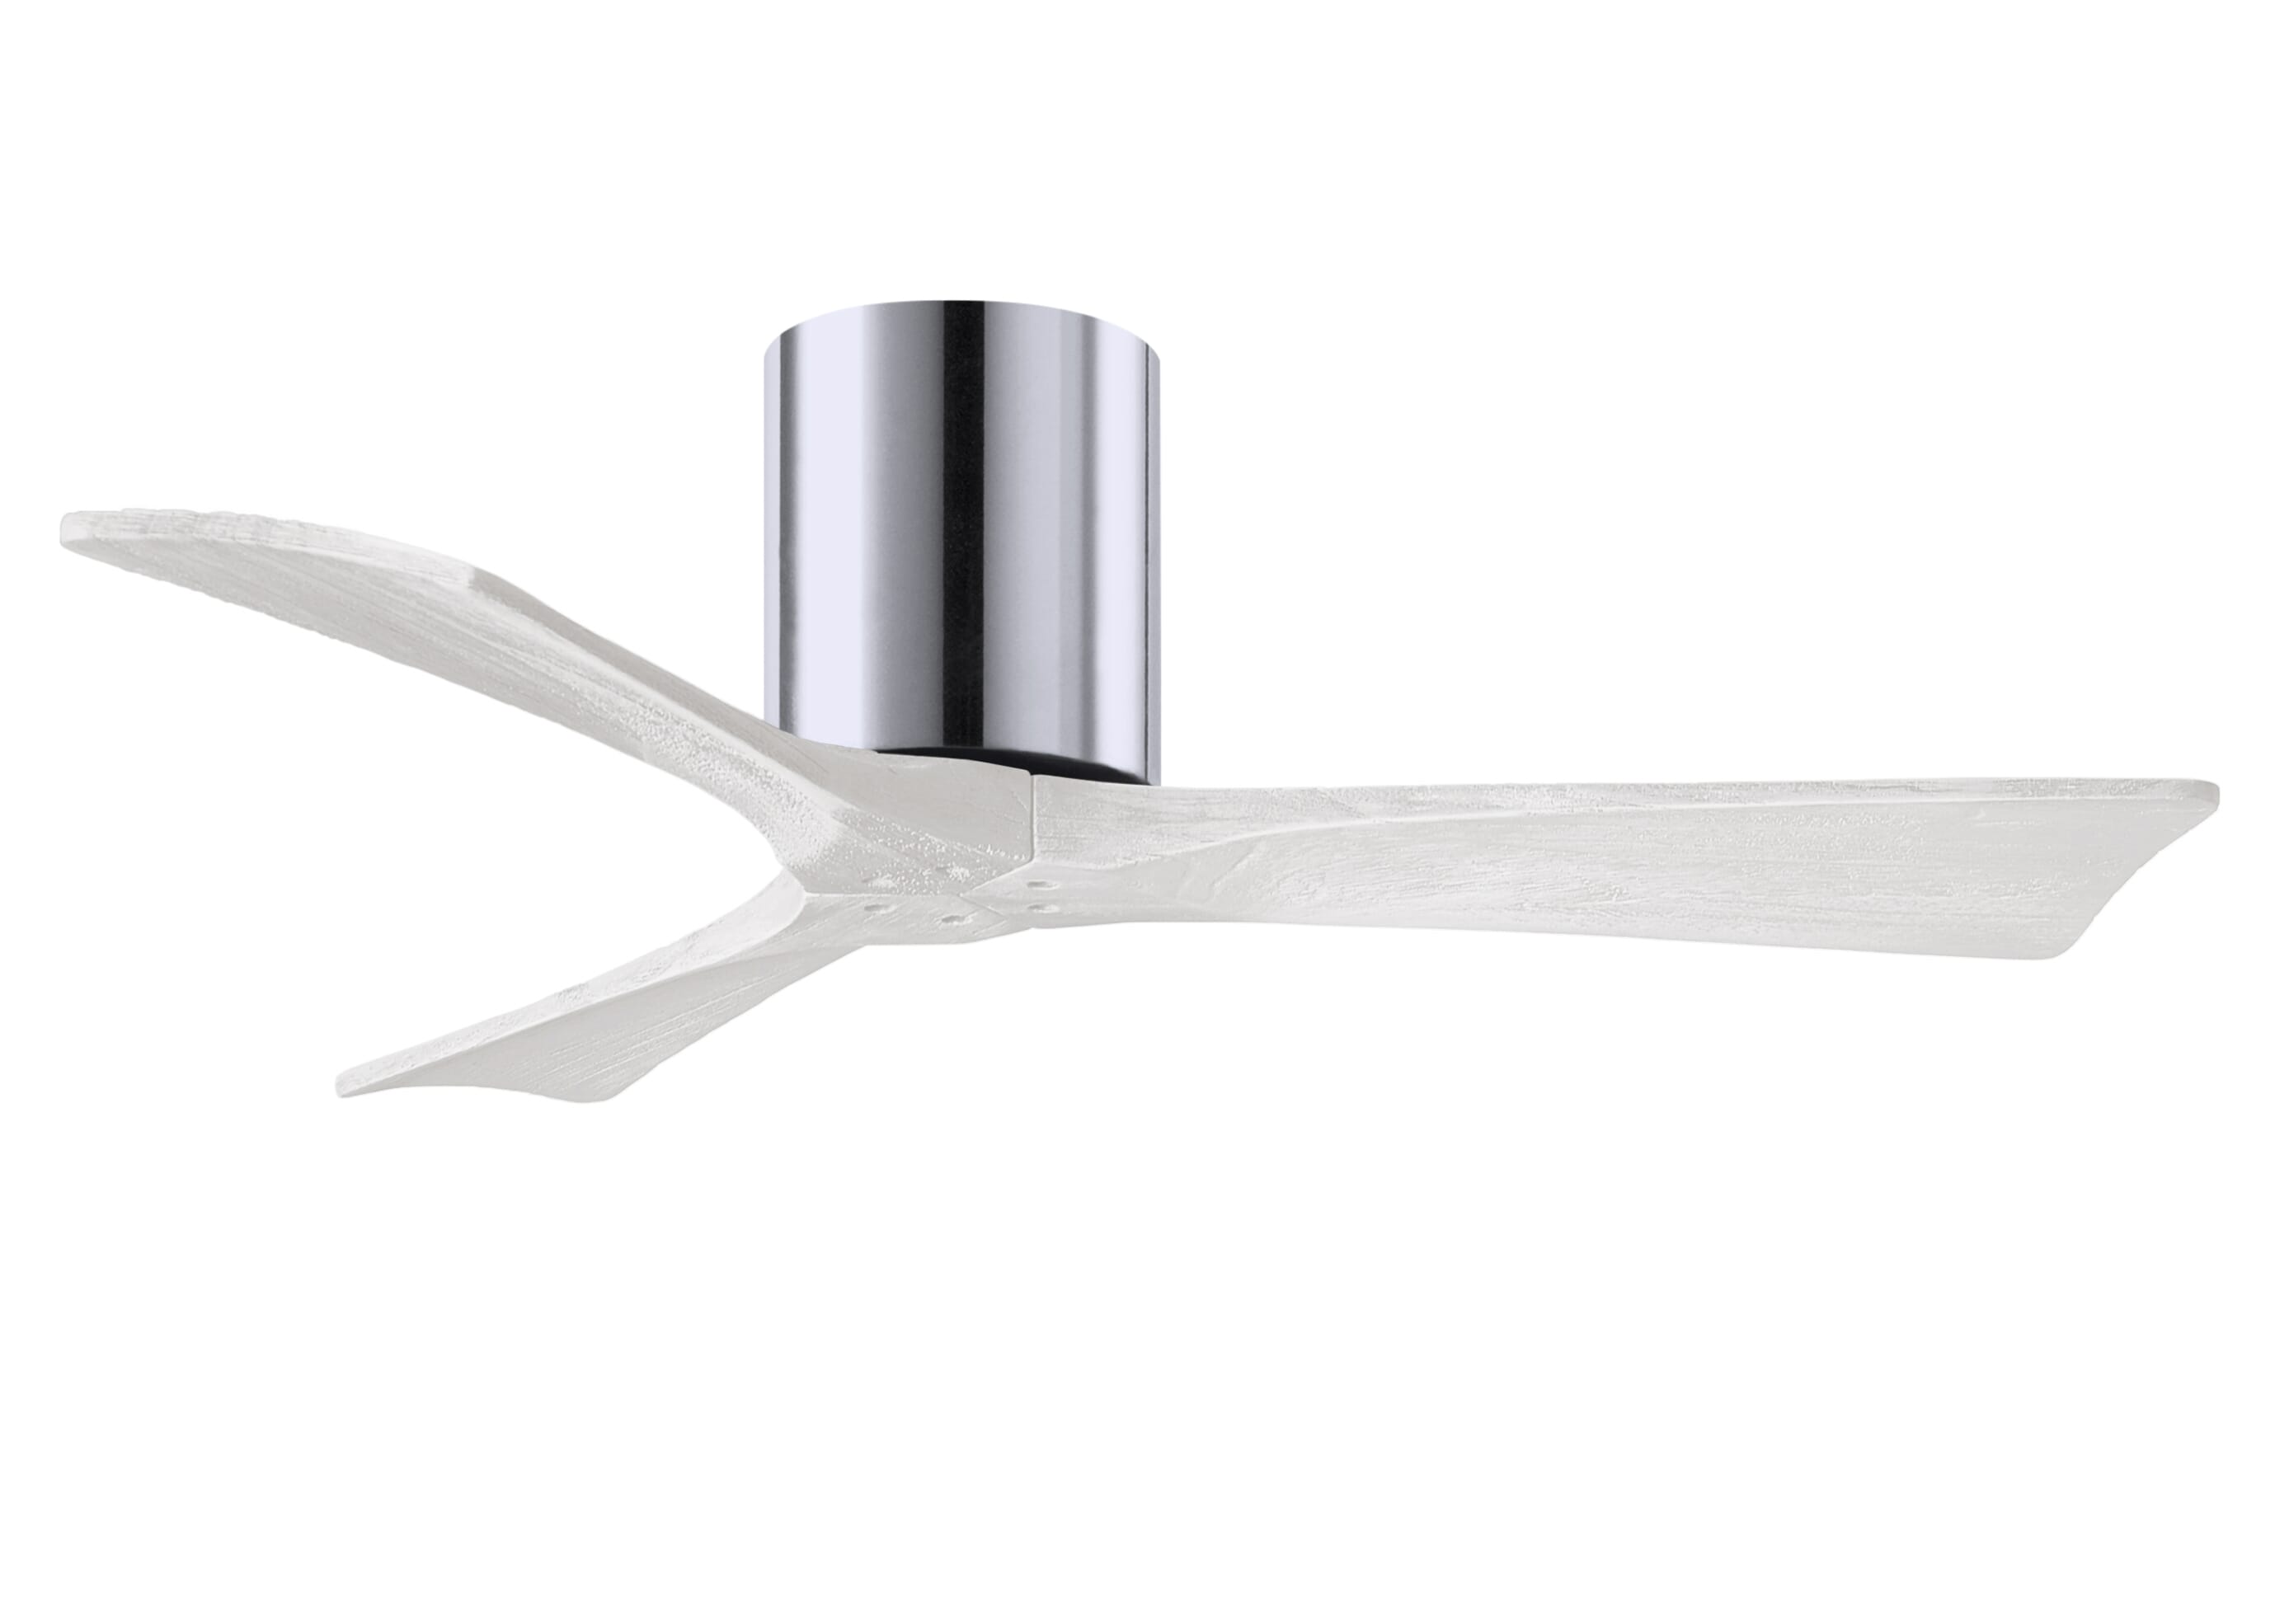 Irene 6-Speed DC 42"" Ceiling Fan in Polished Chrome with Matte White blades -  Matthews Fan Company, IR3H-CR-MWH-42